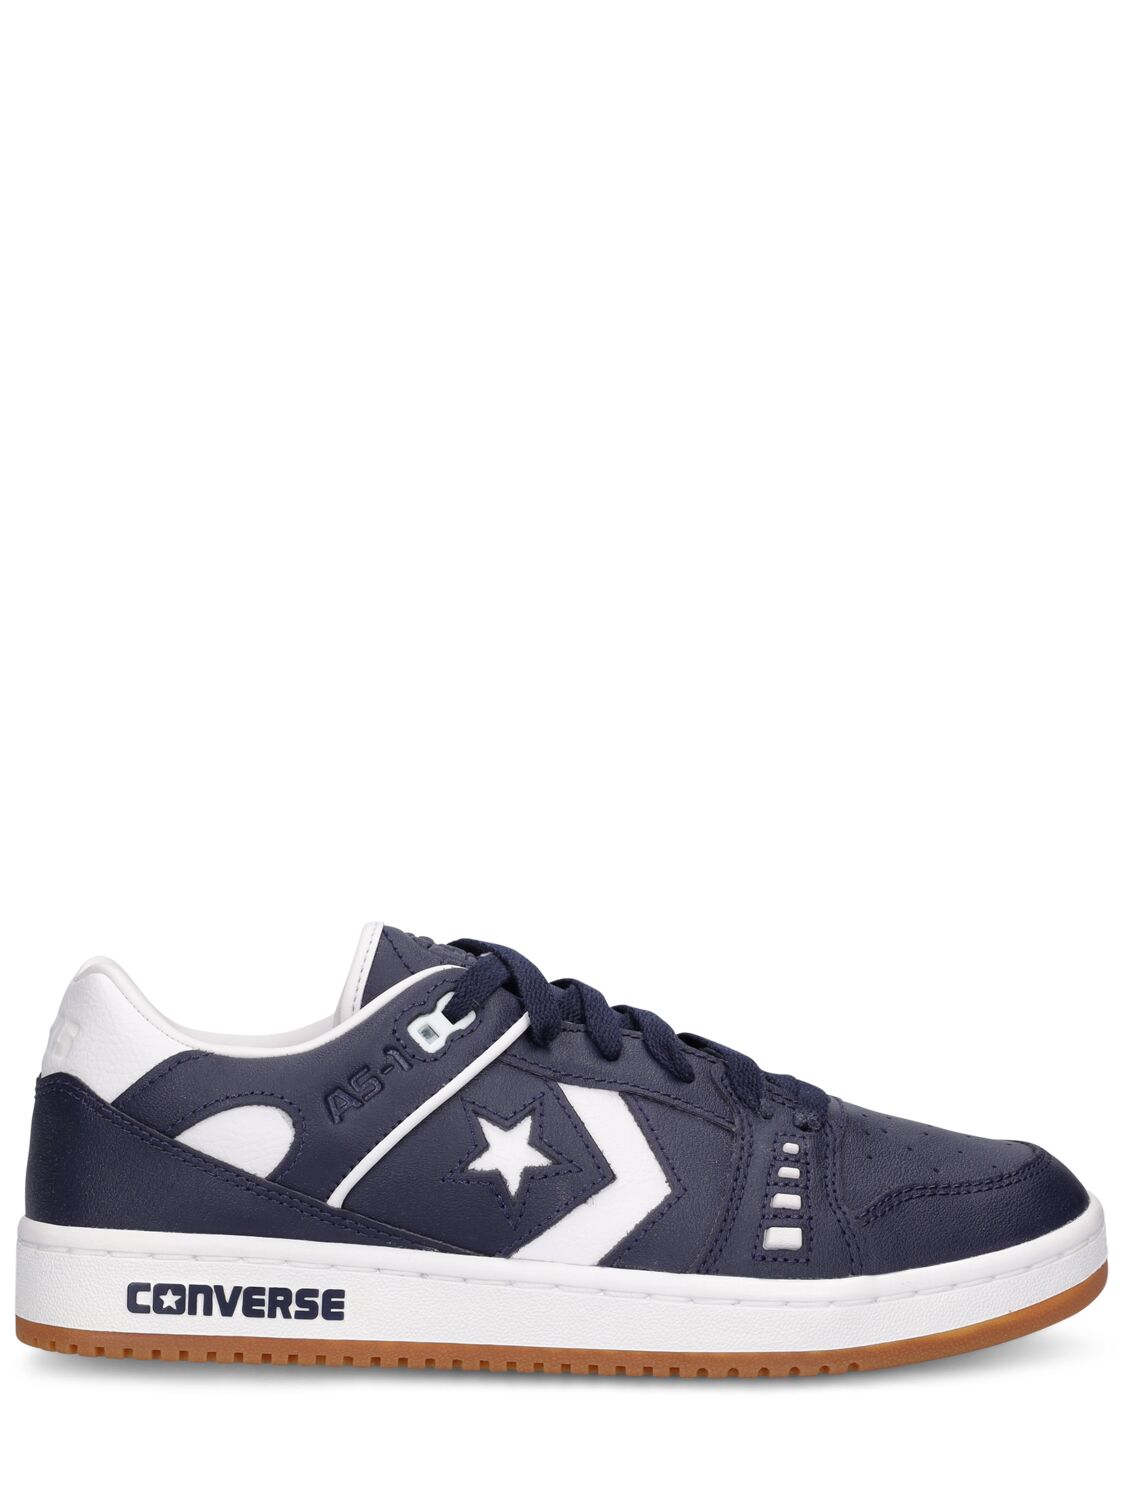 Image of Cons As-1 Pro Sneakers